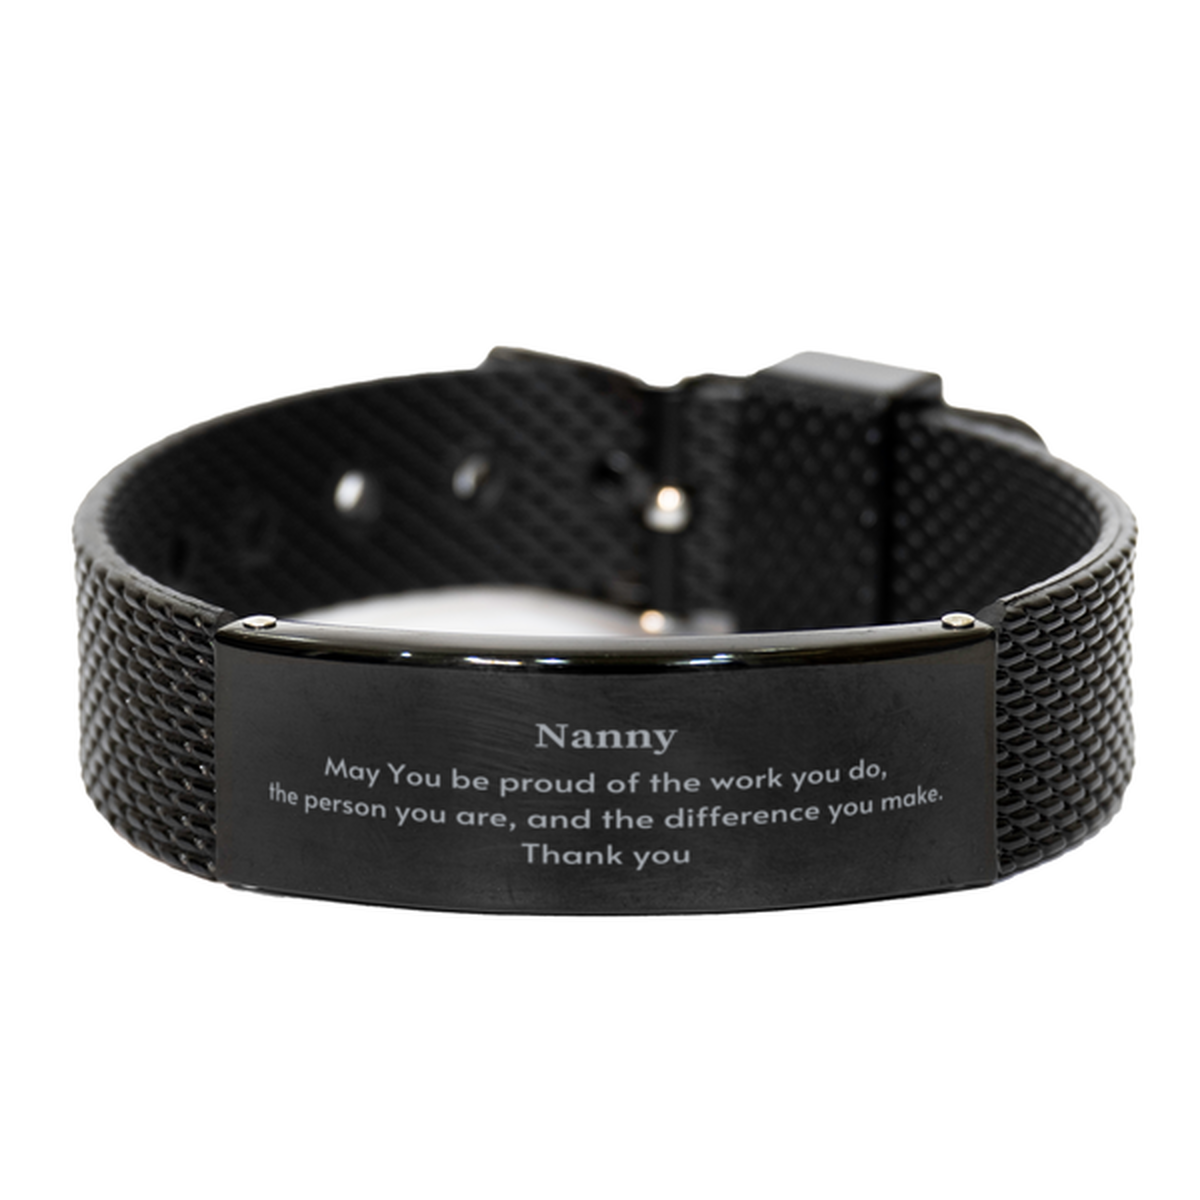 Heartwarming Black Shark Mesh Bracelet Retirement Coworkers Gifts for Nanny, Nanny May You be proud of the work you do, the person you are Gifts for Boss Men Women Friends